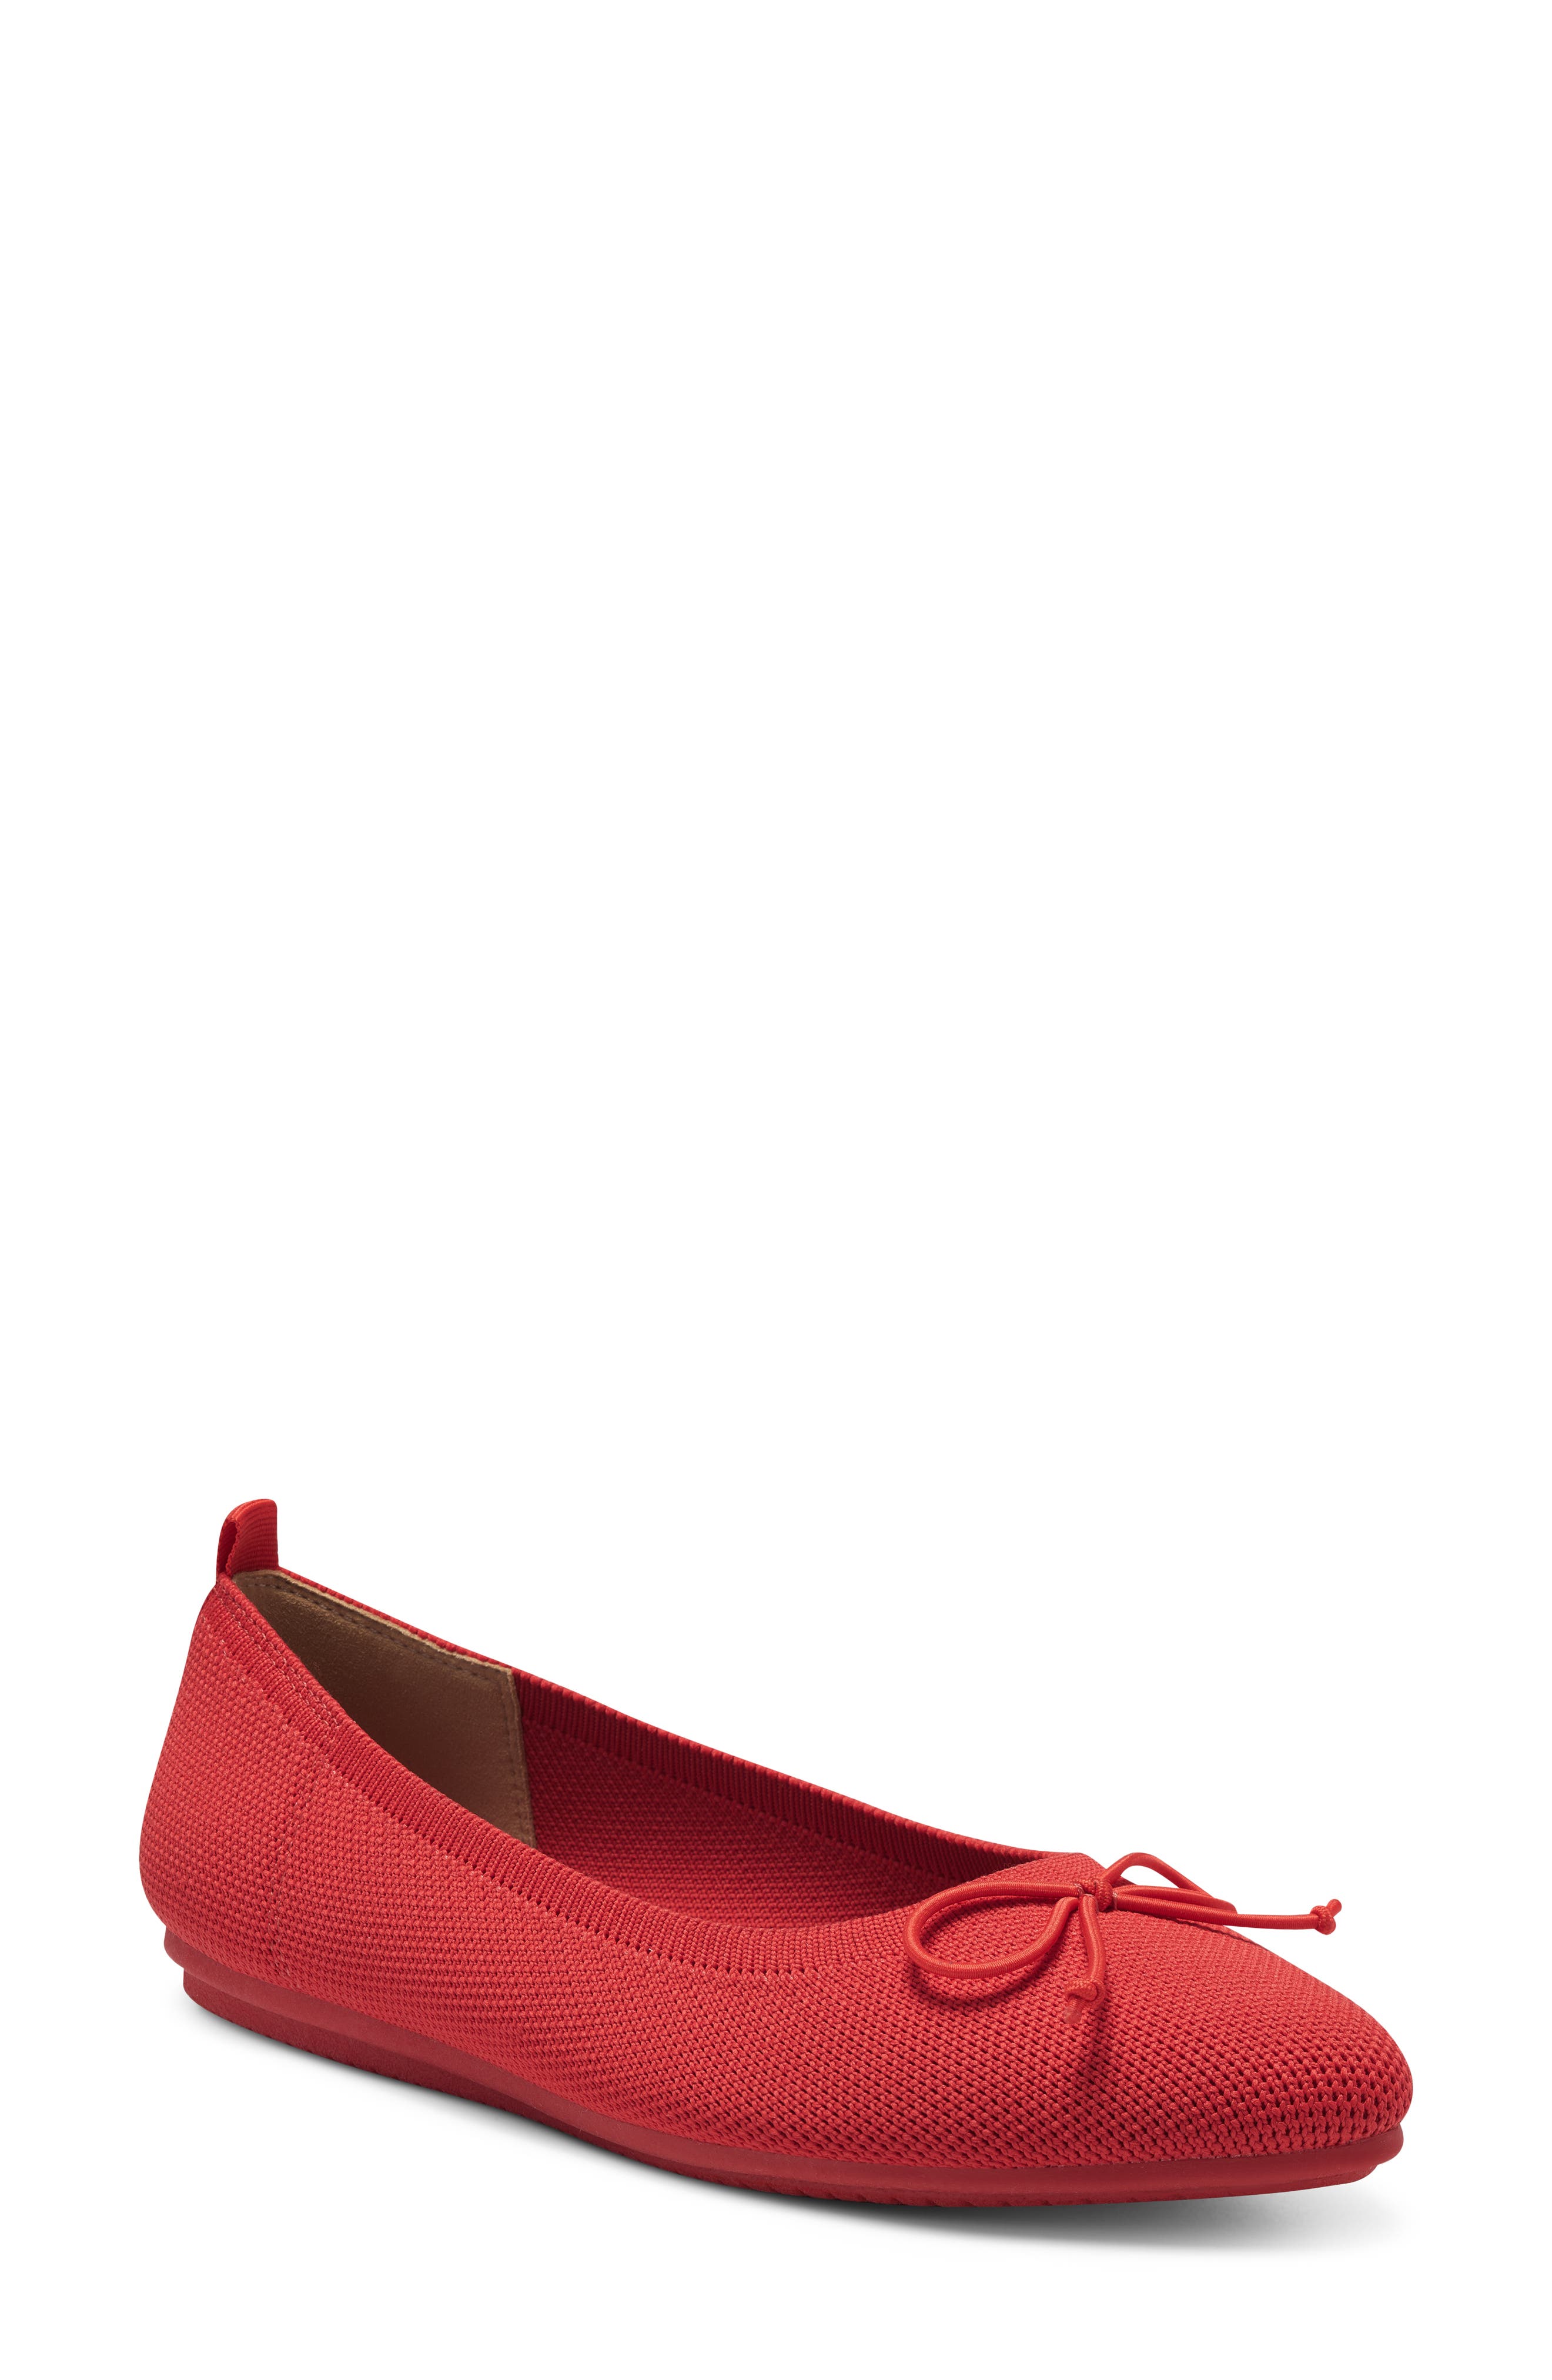 UPC 194307562665 product image for Women's Vince Camuto Flanna Washable Knit Ballet Flat, Size 7.5 M - Red | upcitemdb.com